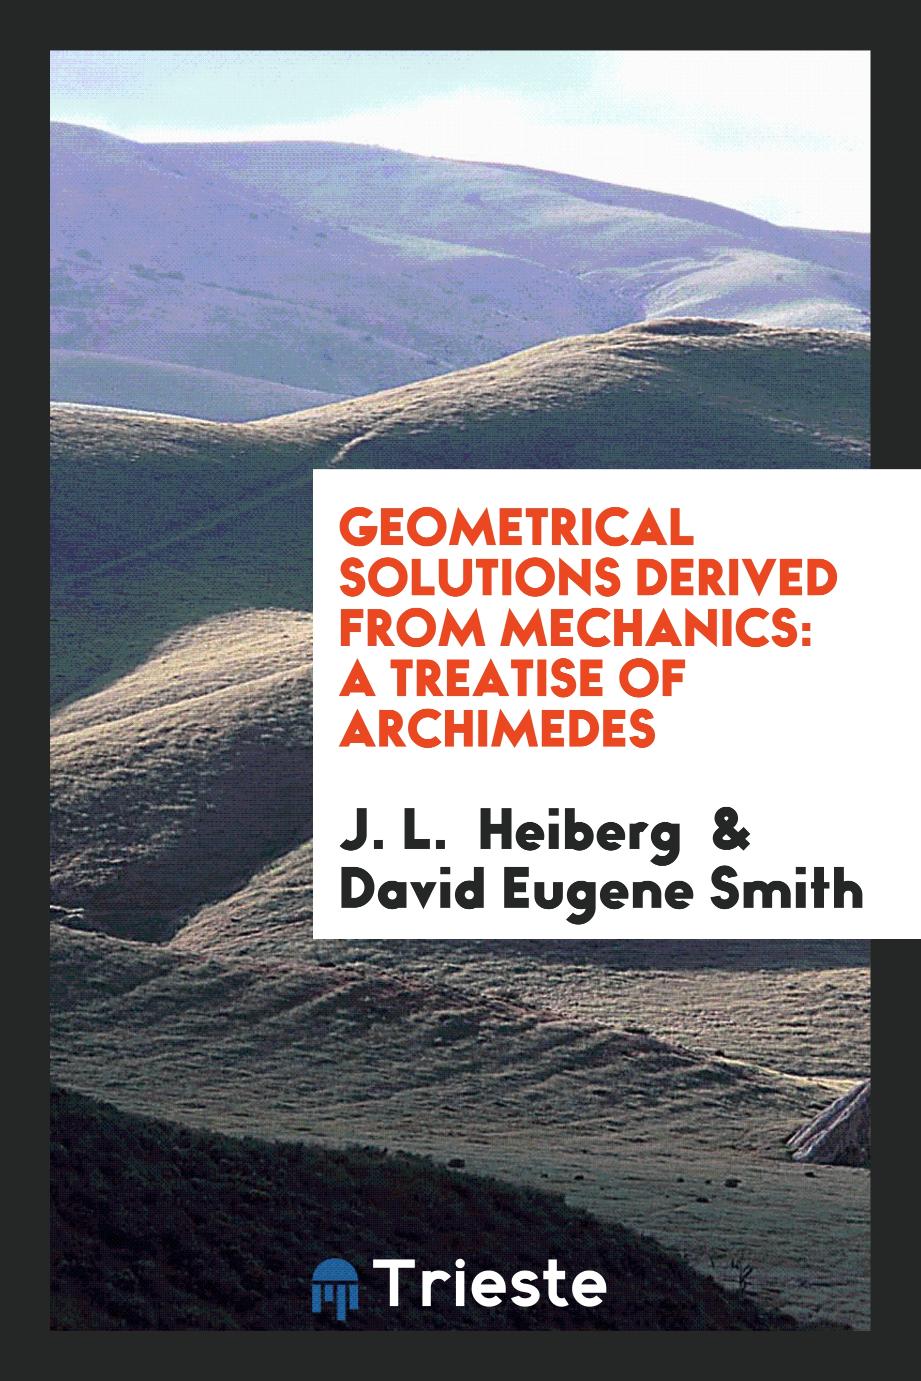 Geometrical Solutions Derived from Mechanics: A Treatise of Archimedes